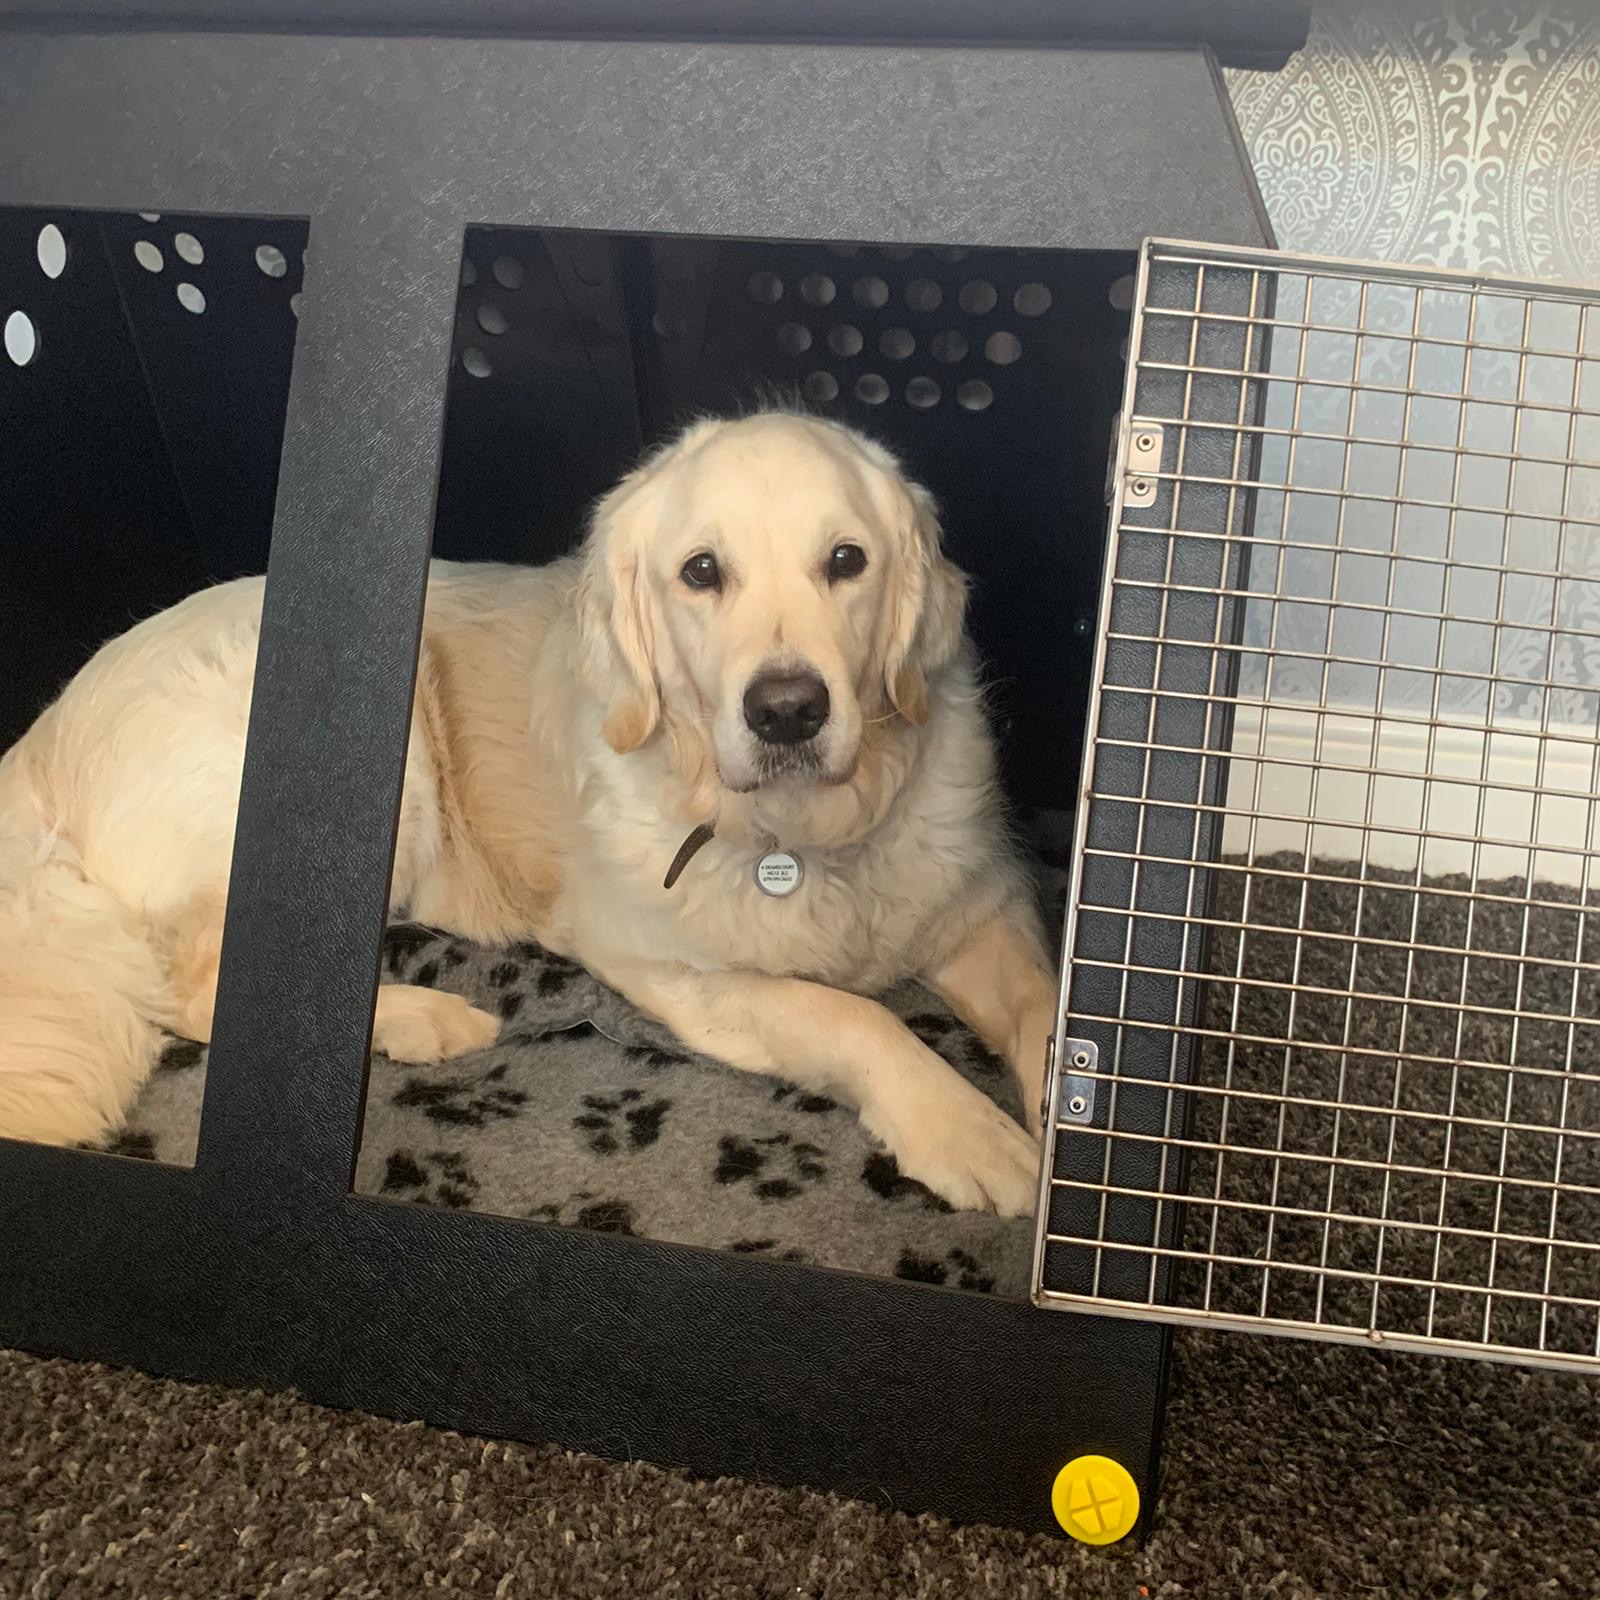 Marley the golden retriever in his travel cage